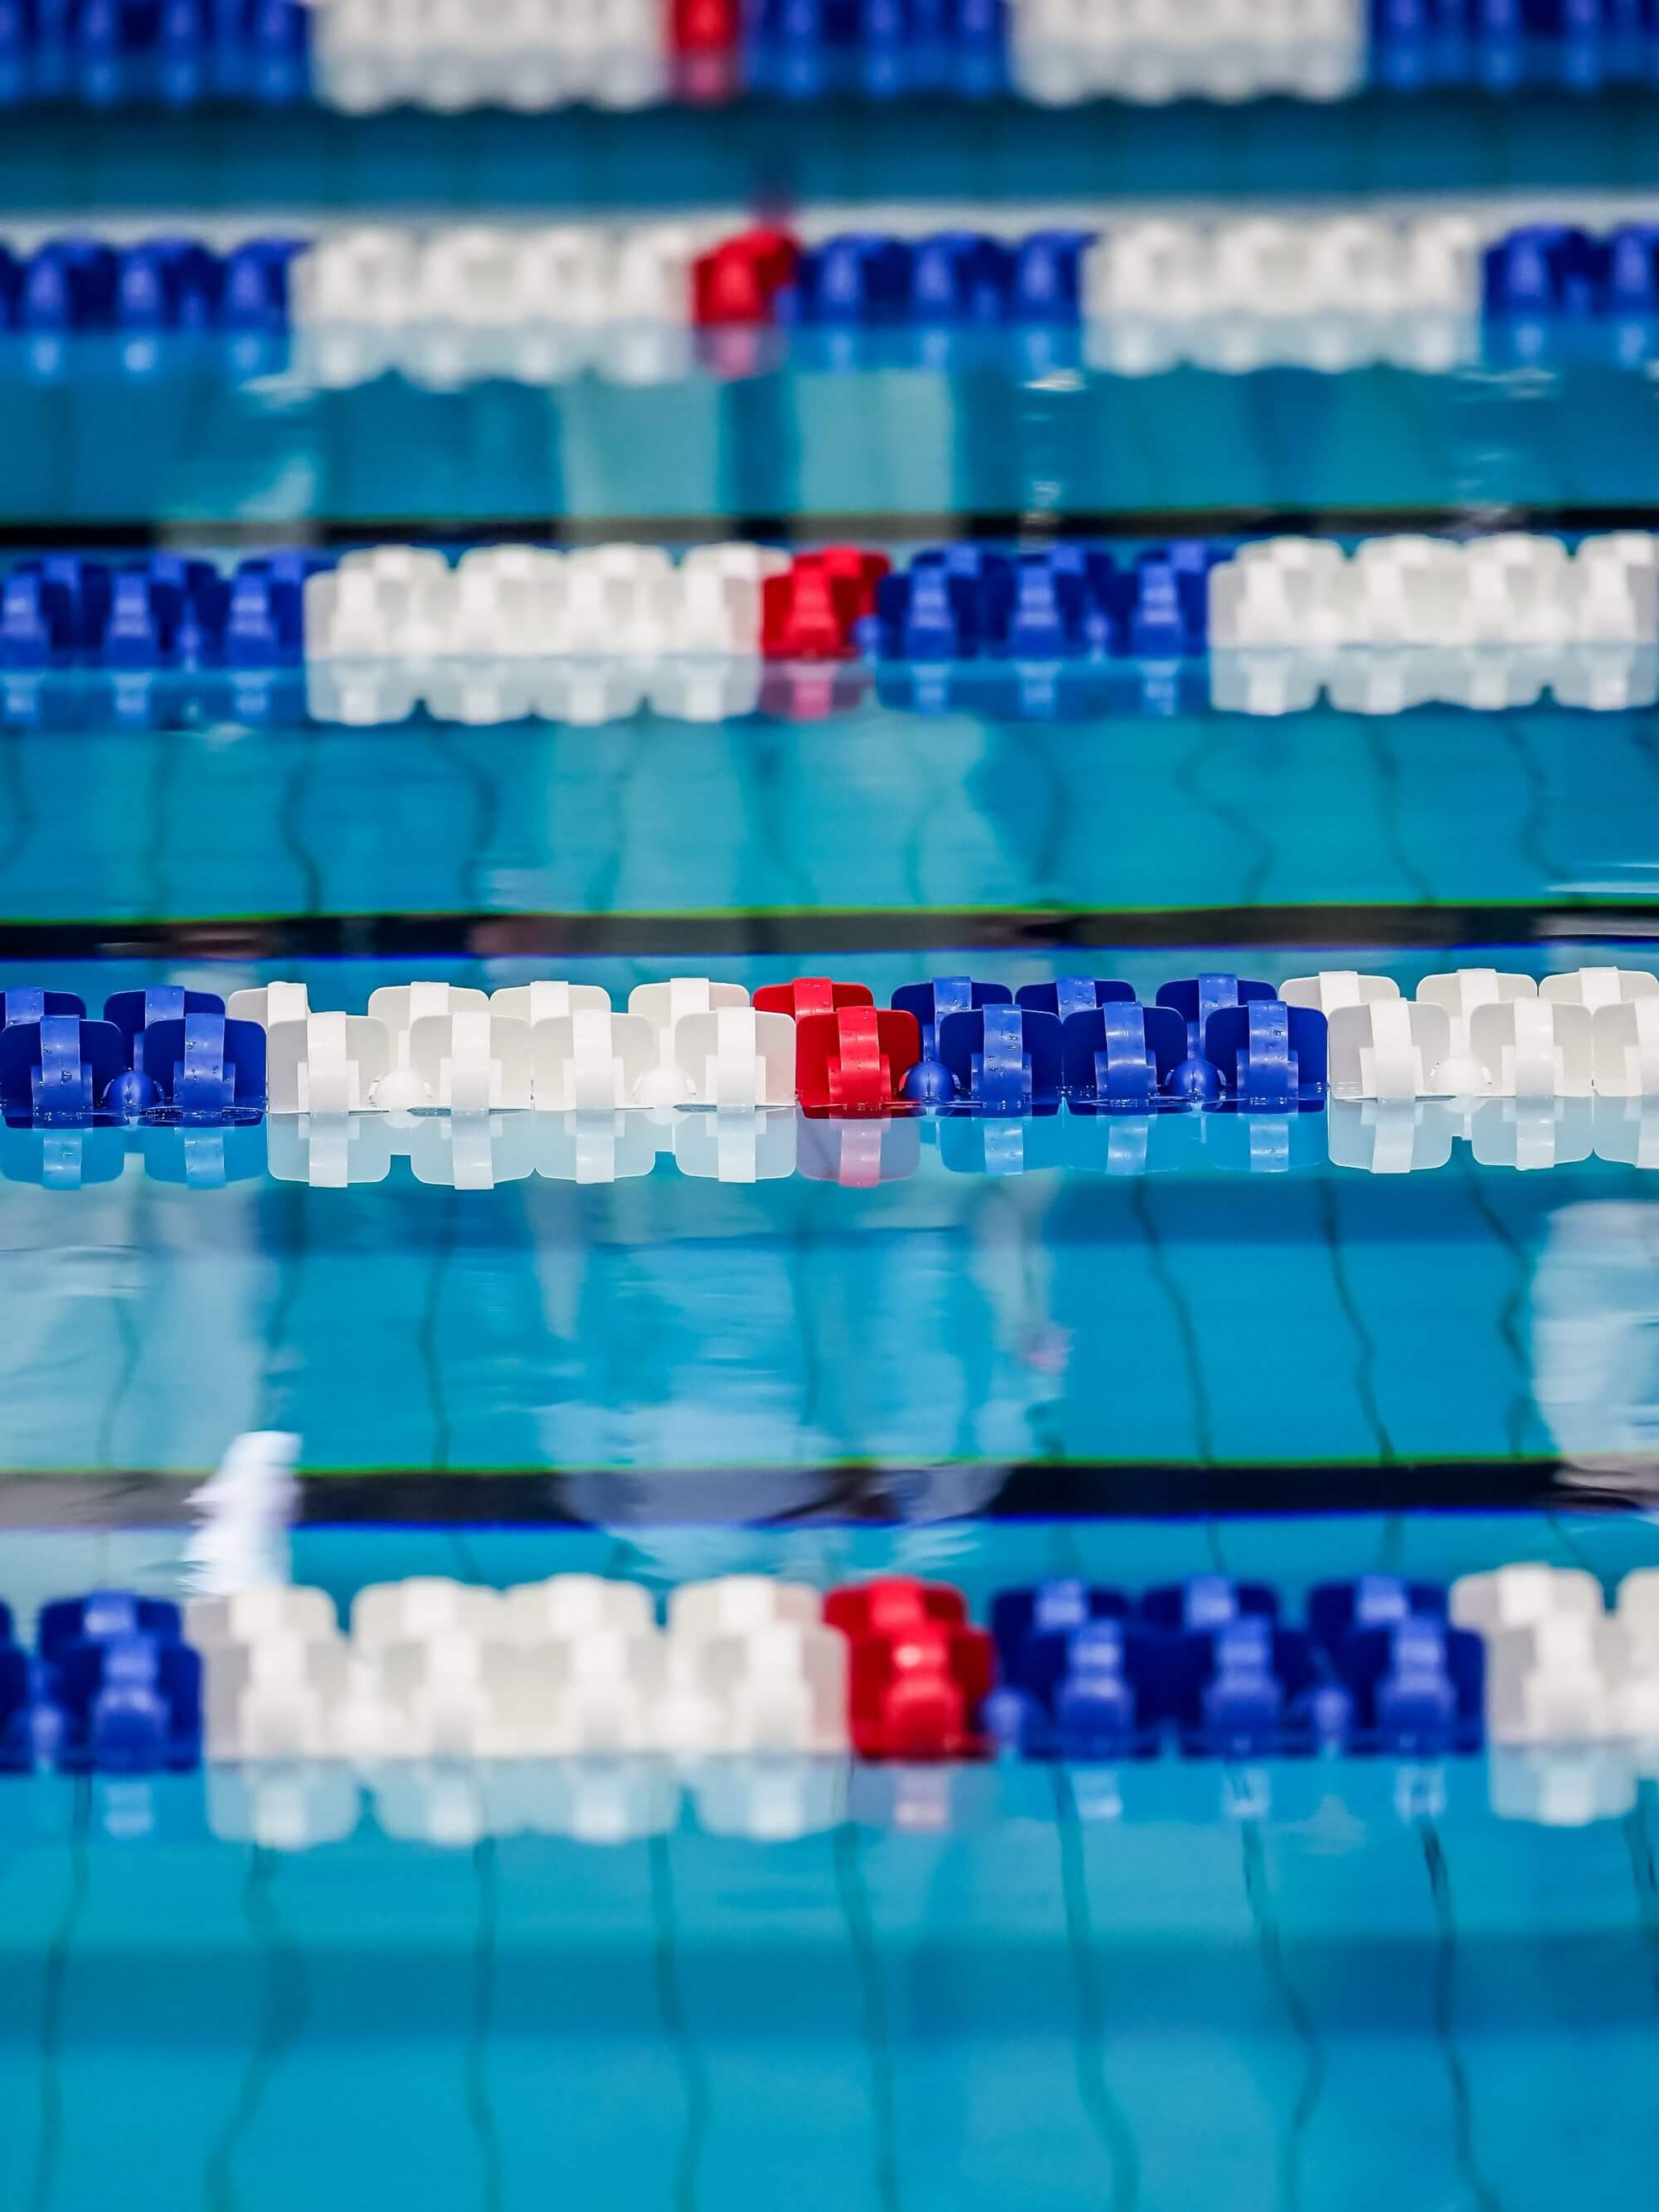 Niagara Women's Swimmers Sue University For Alleged Harassment by Men's